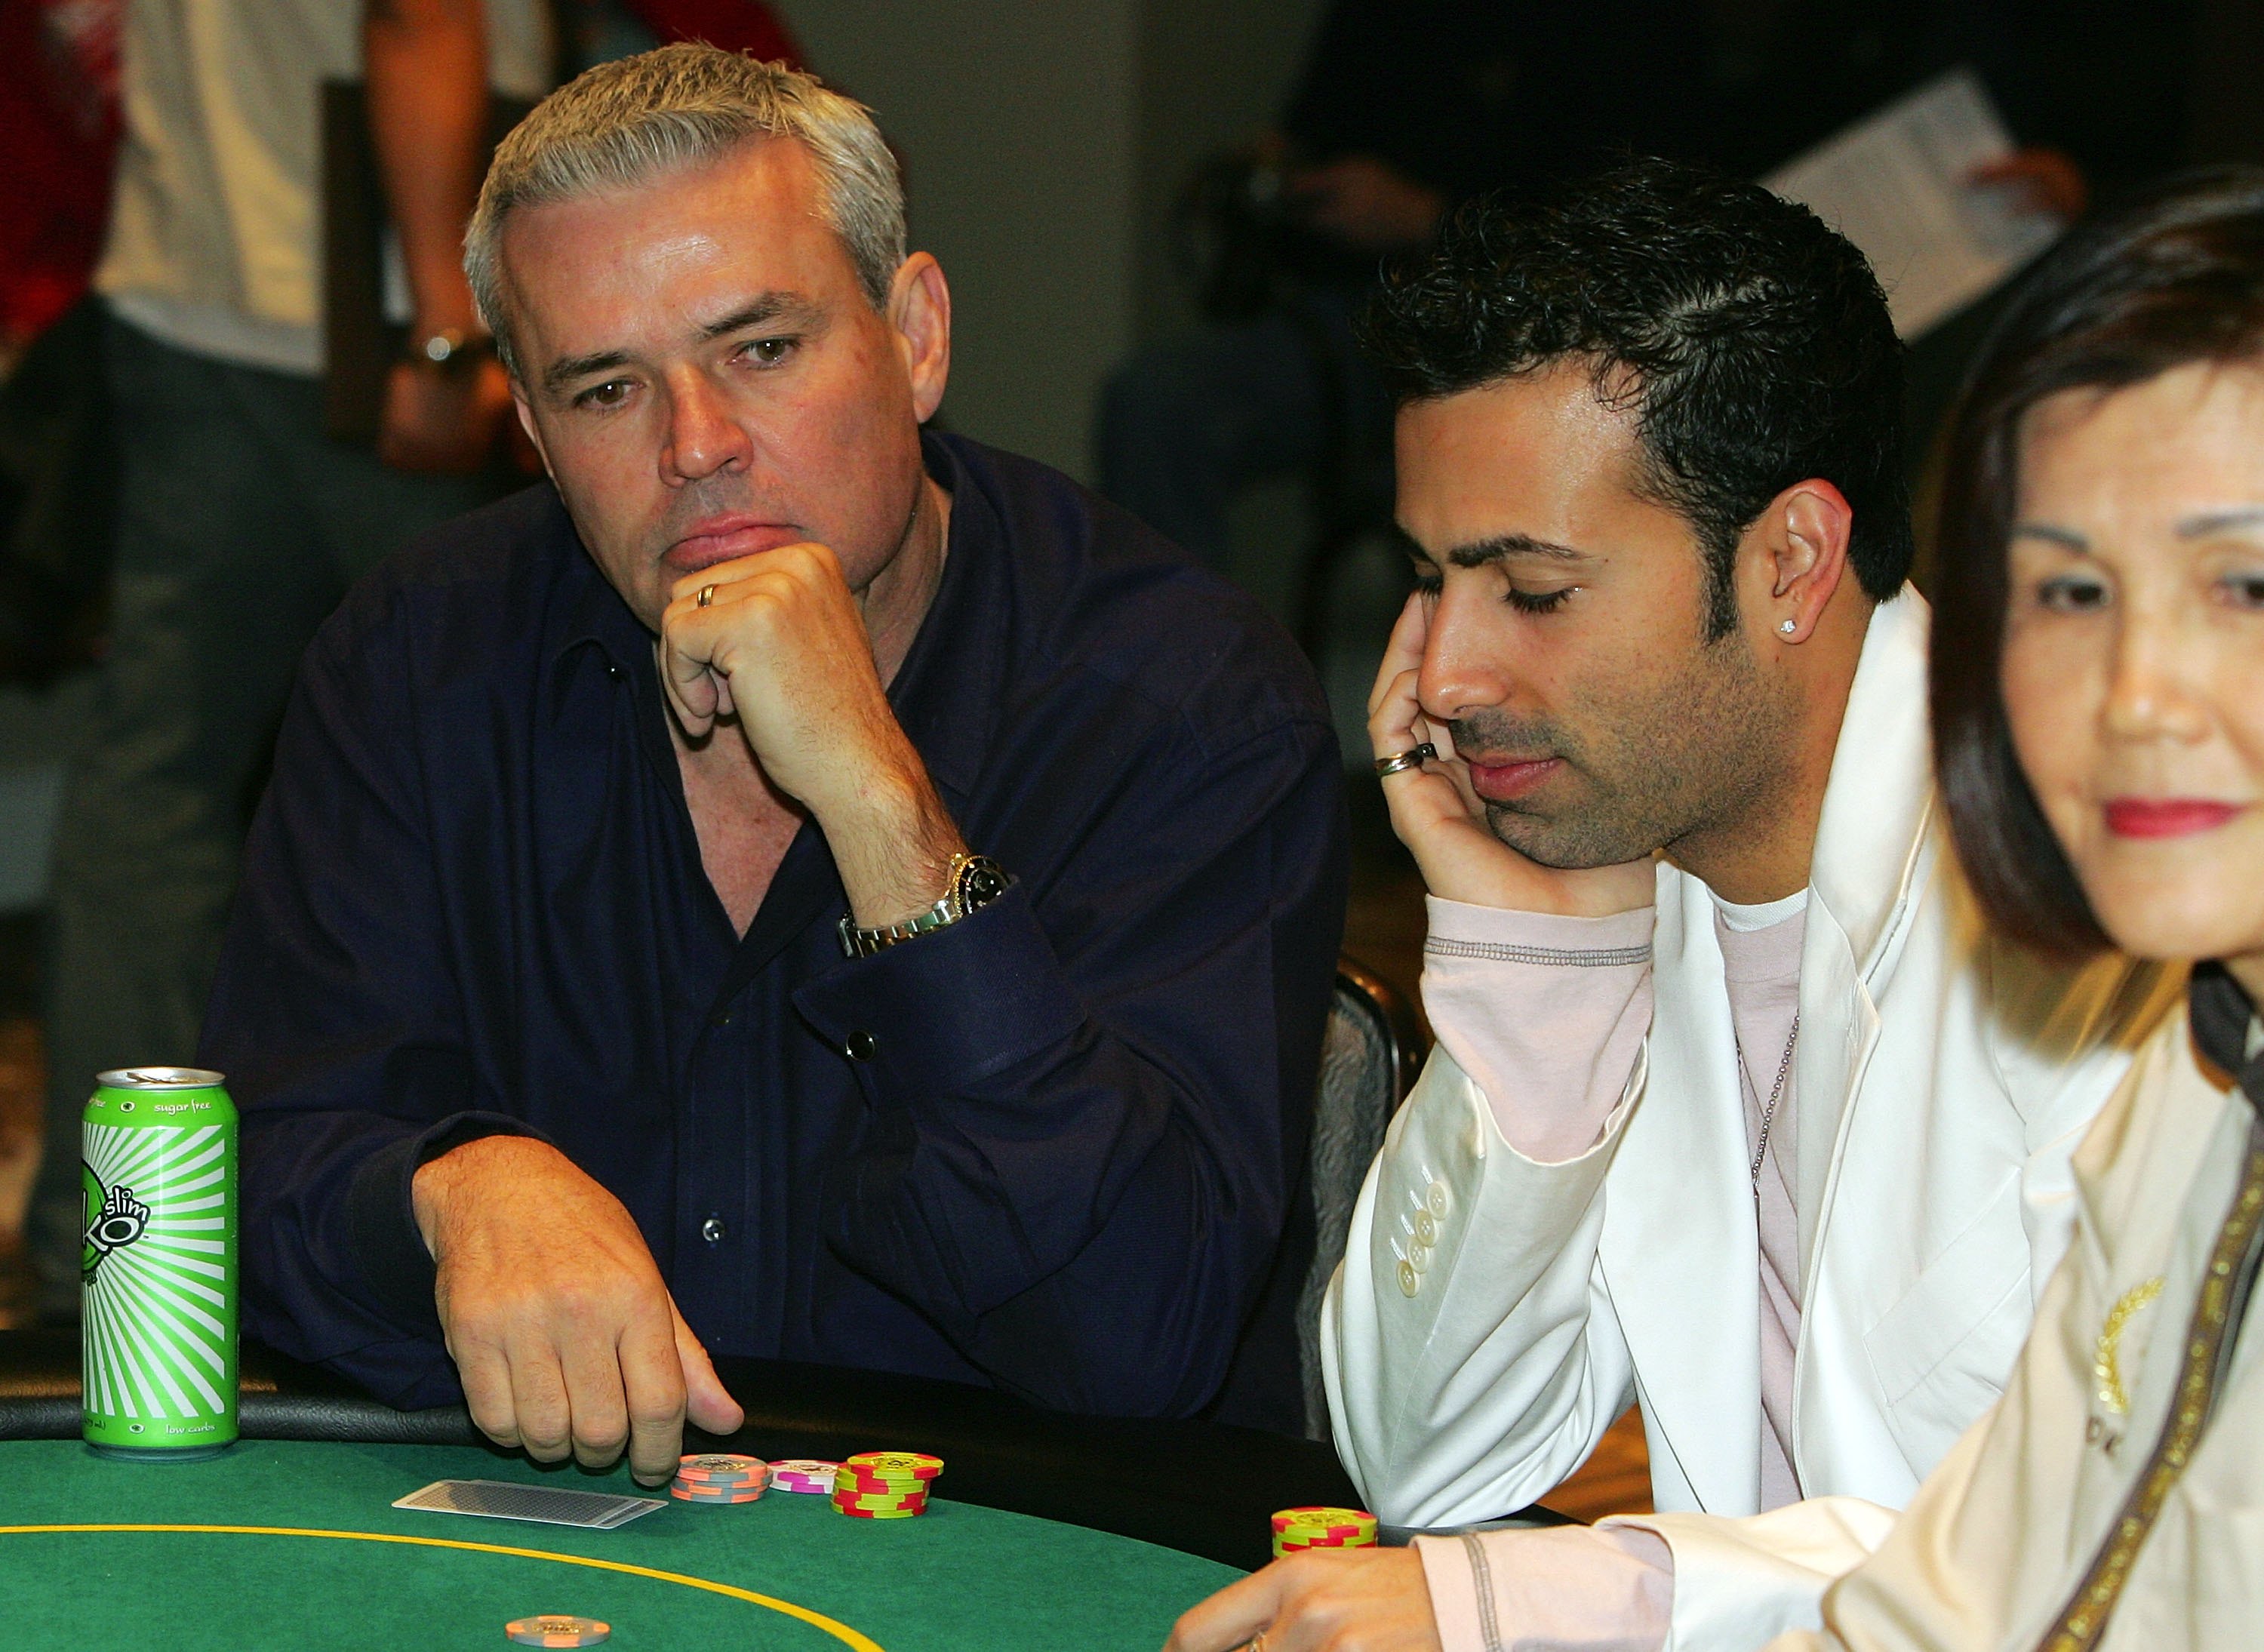 LAS VEGAS, NV - MARCH 08:  Professional wrestling personality Eric Bischoff (L) participates in the Jeff Gordon Foundation Poker Classic at Caesars Palace Marsh 8, 2006 in Las Vegas, Nevada. The foundation benefits several charities dedicated to helping children with chronic illnesses and their families.  (Photo by Ethan Miller/Getty Images)